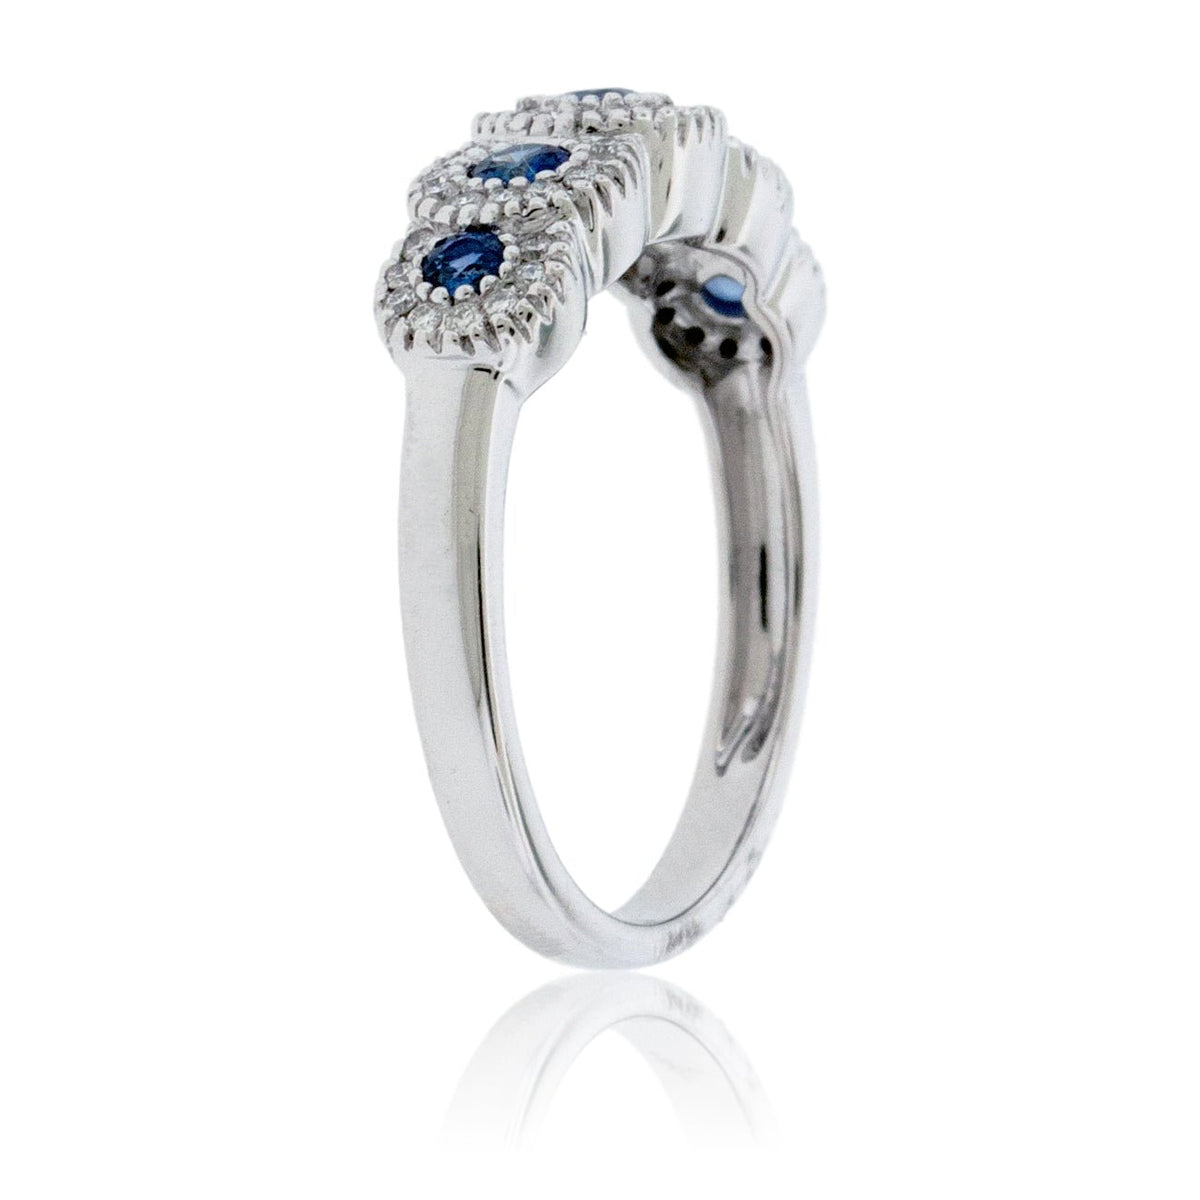 5 Round Blue Sapphire with Diamond Accent Ring - Park City Jewelers